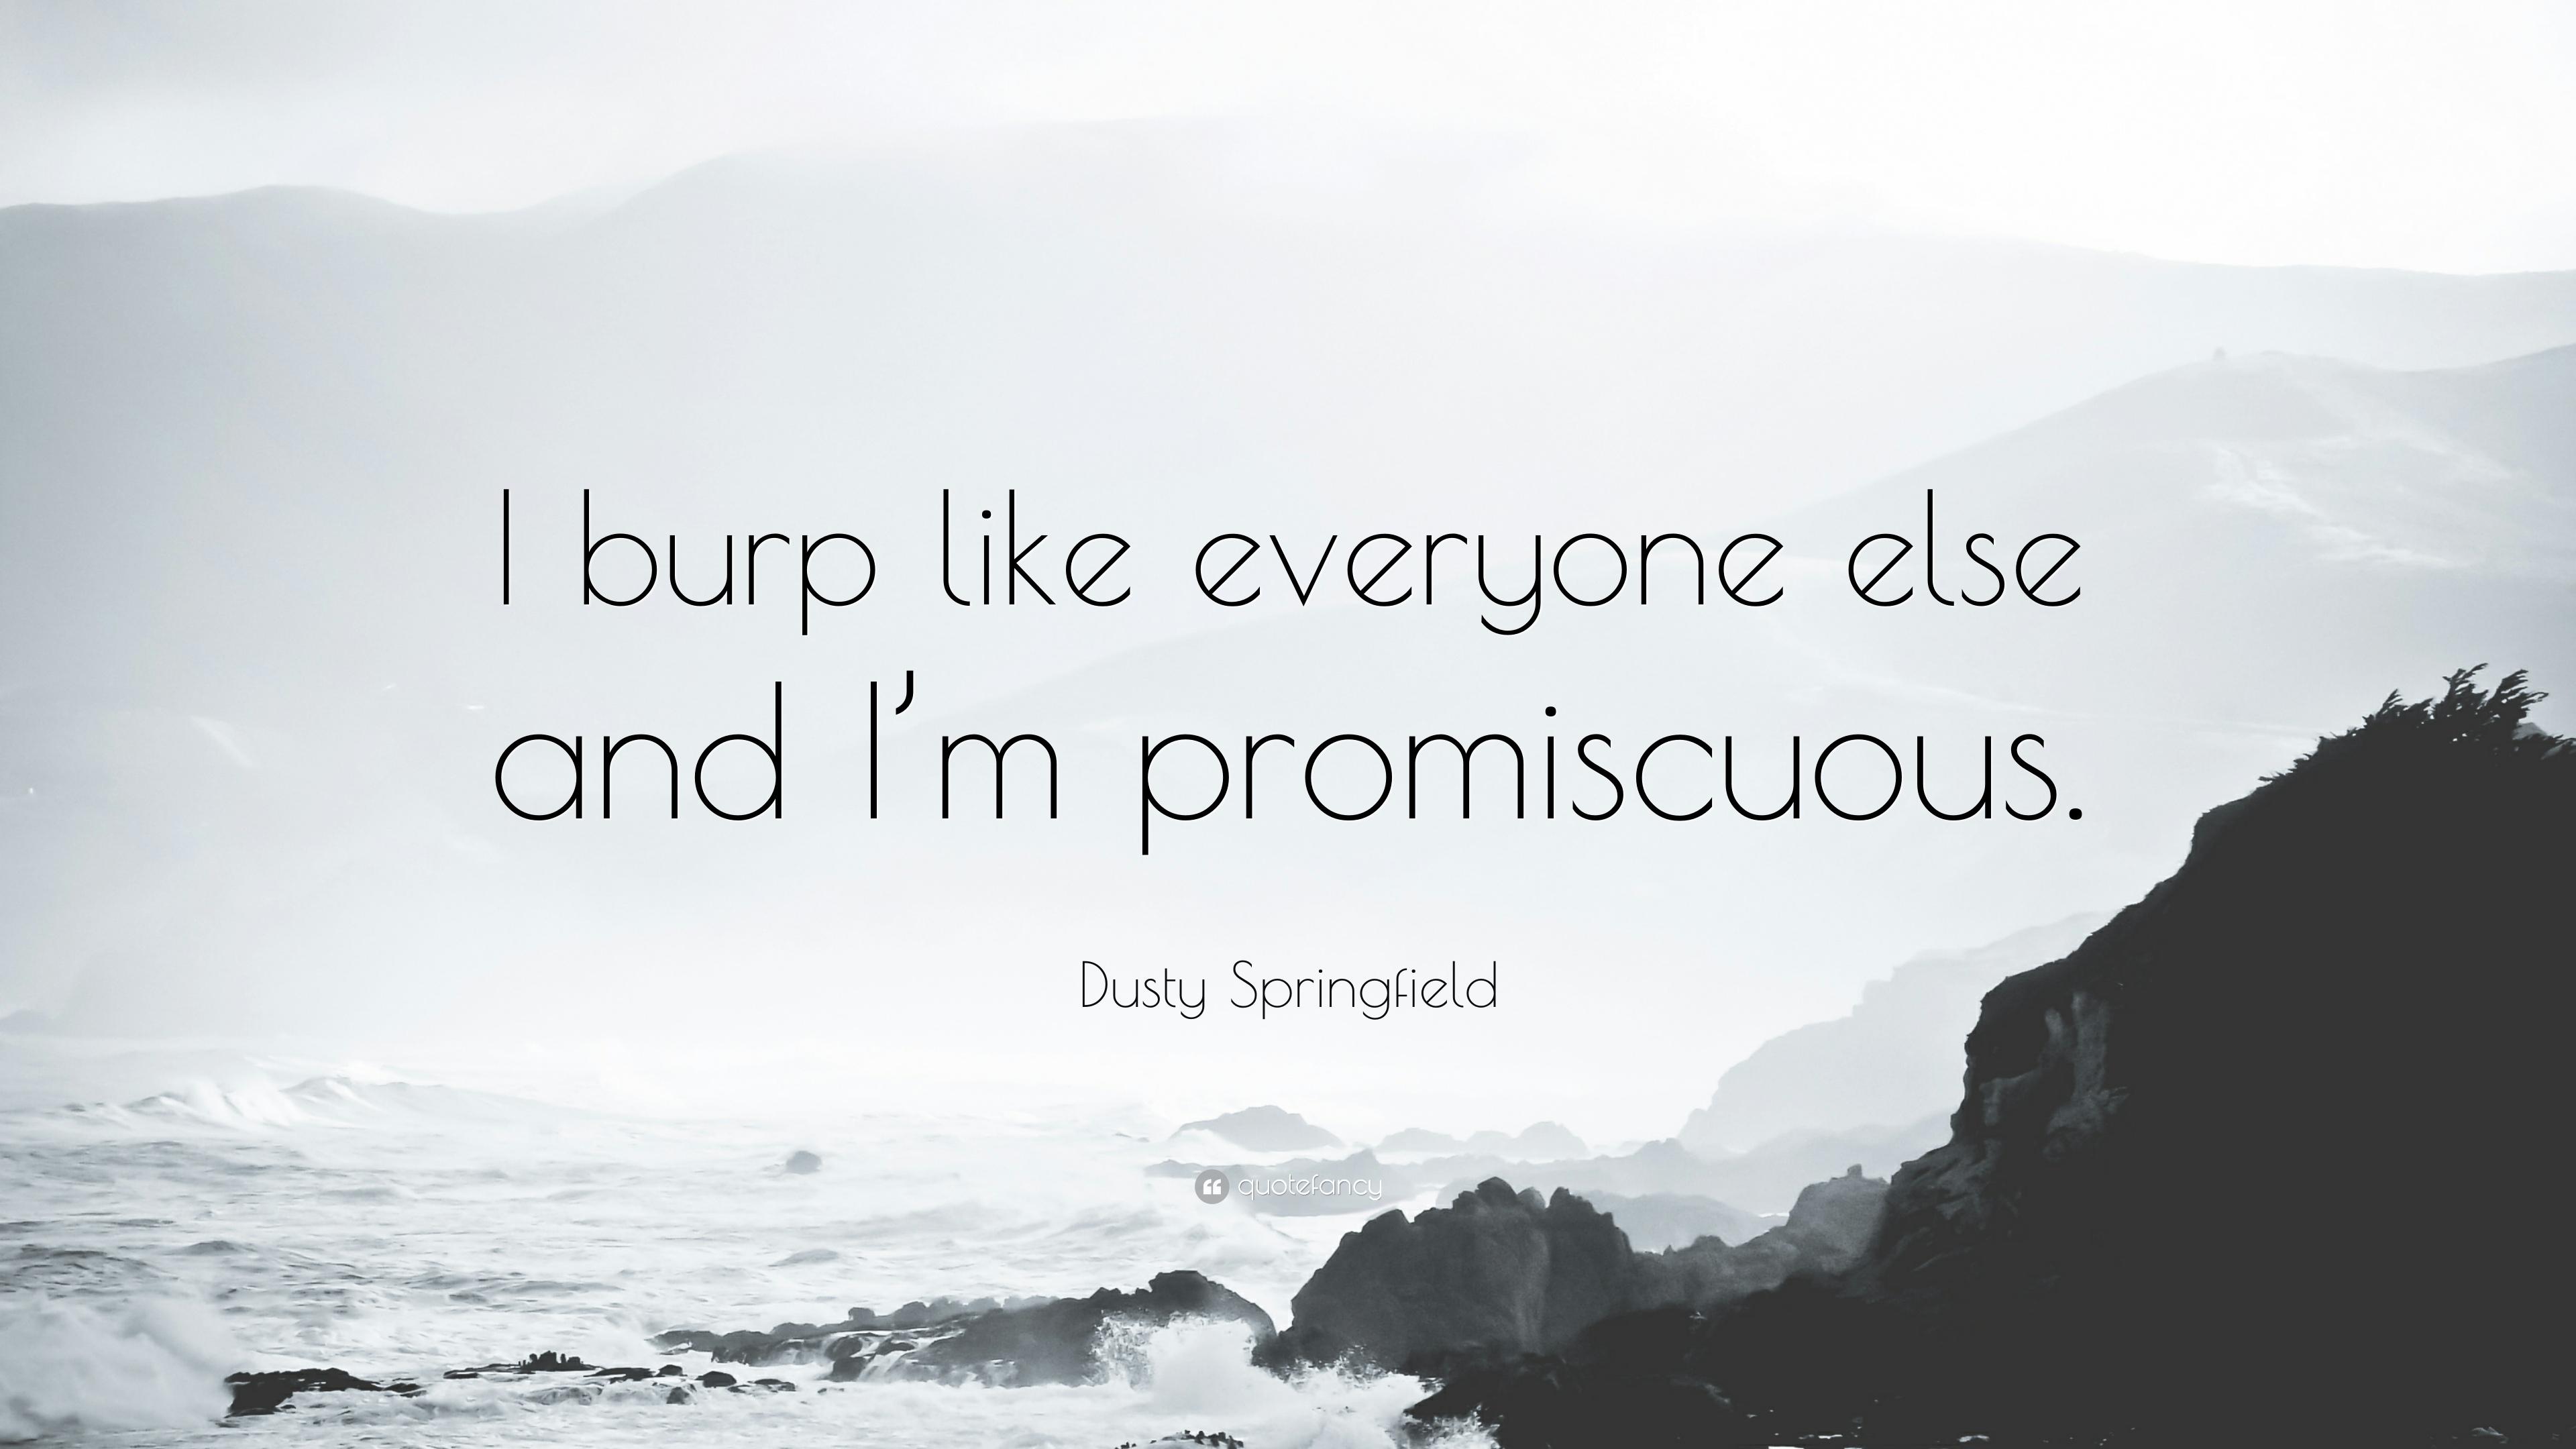 Dusty Springfield Quote: “I burp like everyone else and I'm